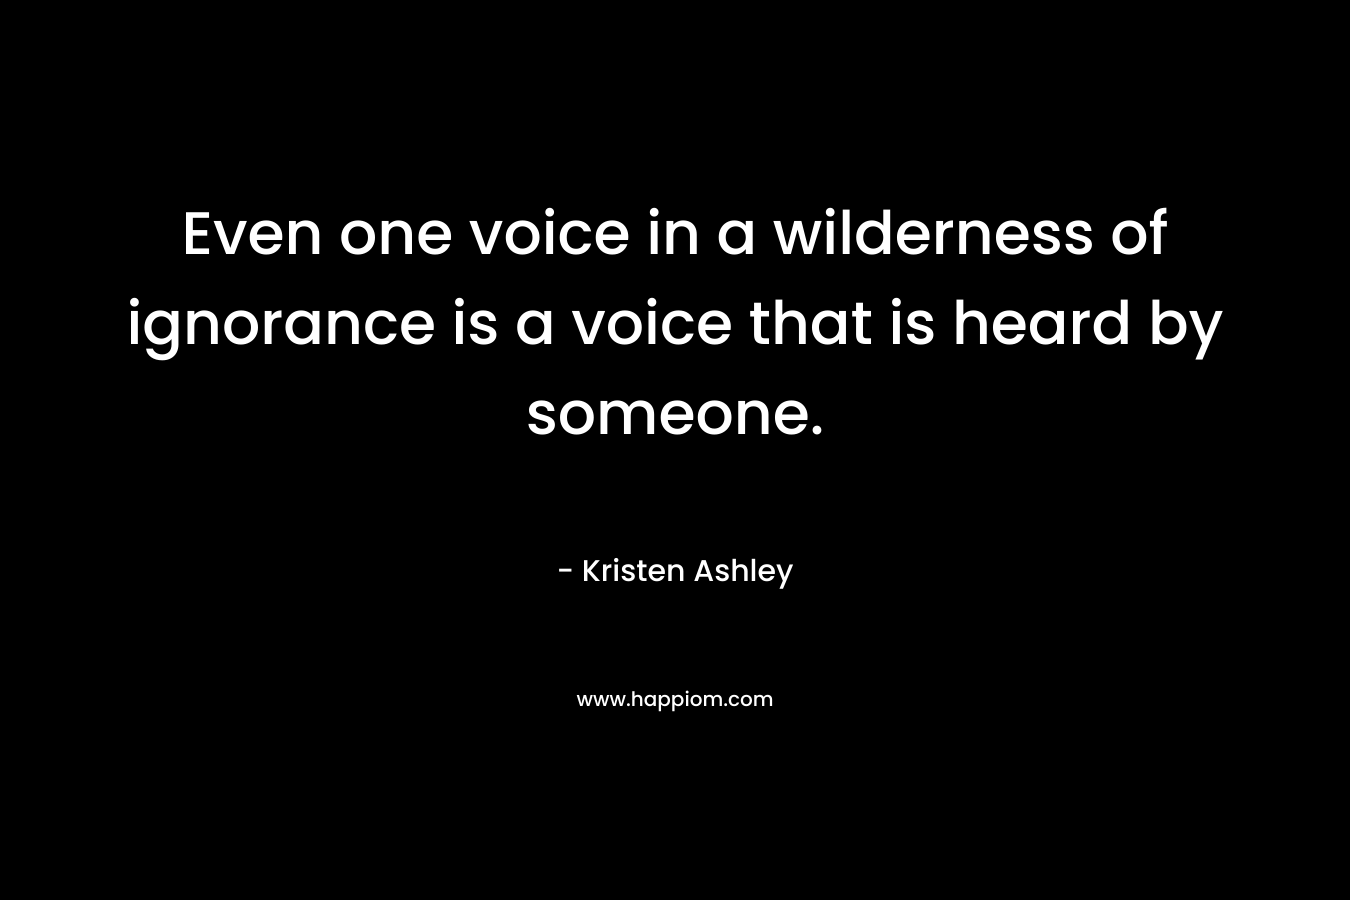 Even one voice in a wilderness of ignorance is a voice that is heard by someone. – Kristen Ashley